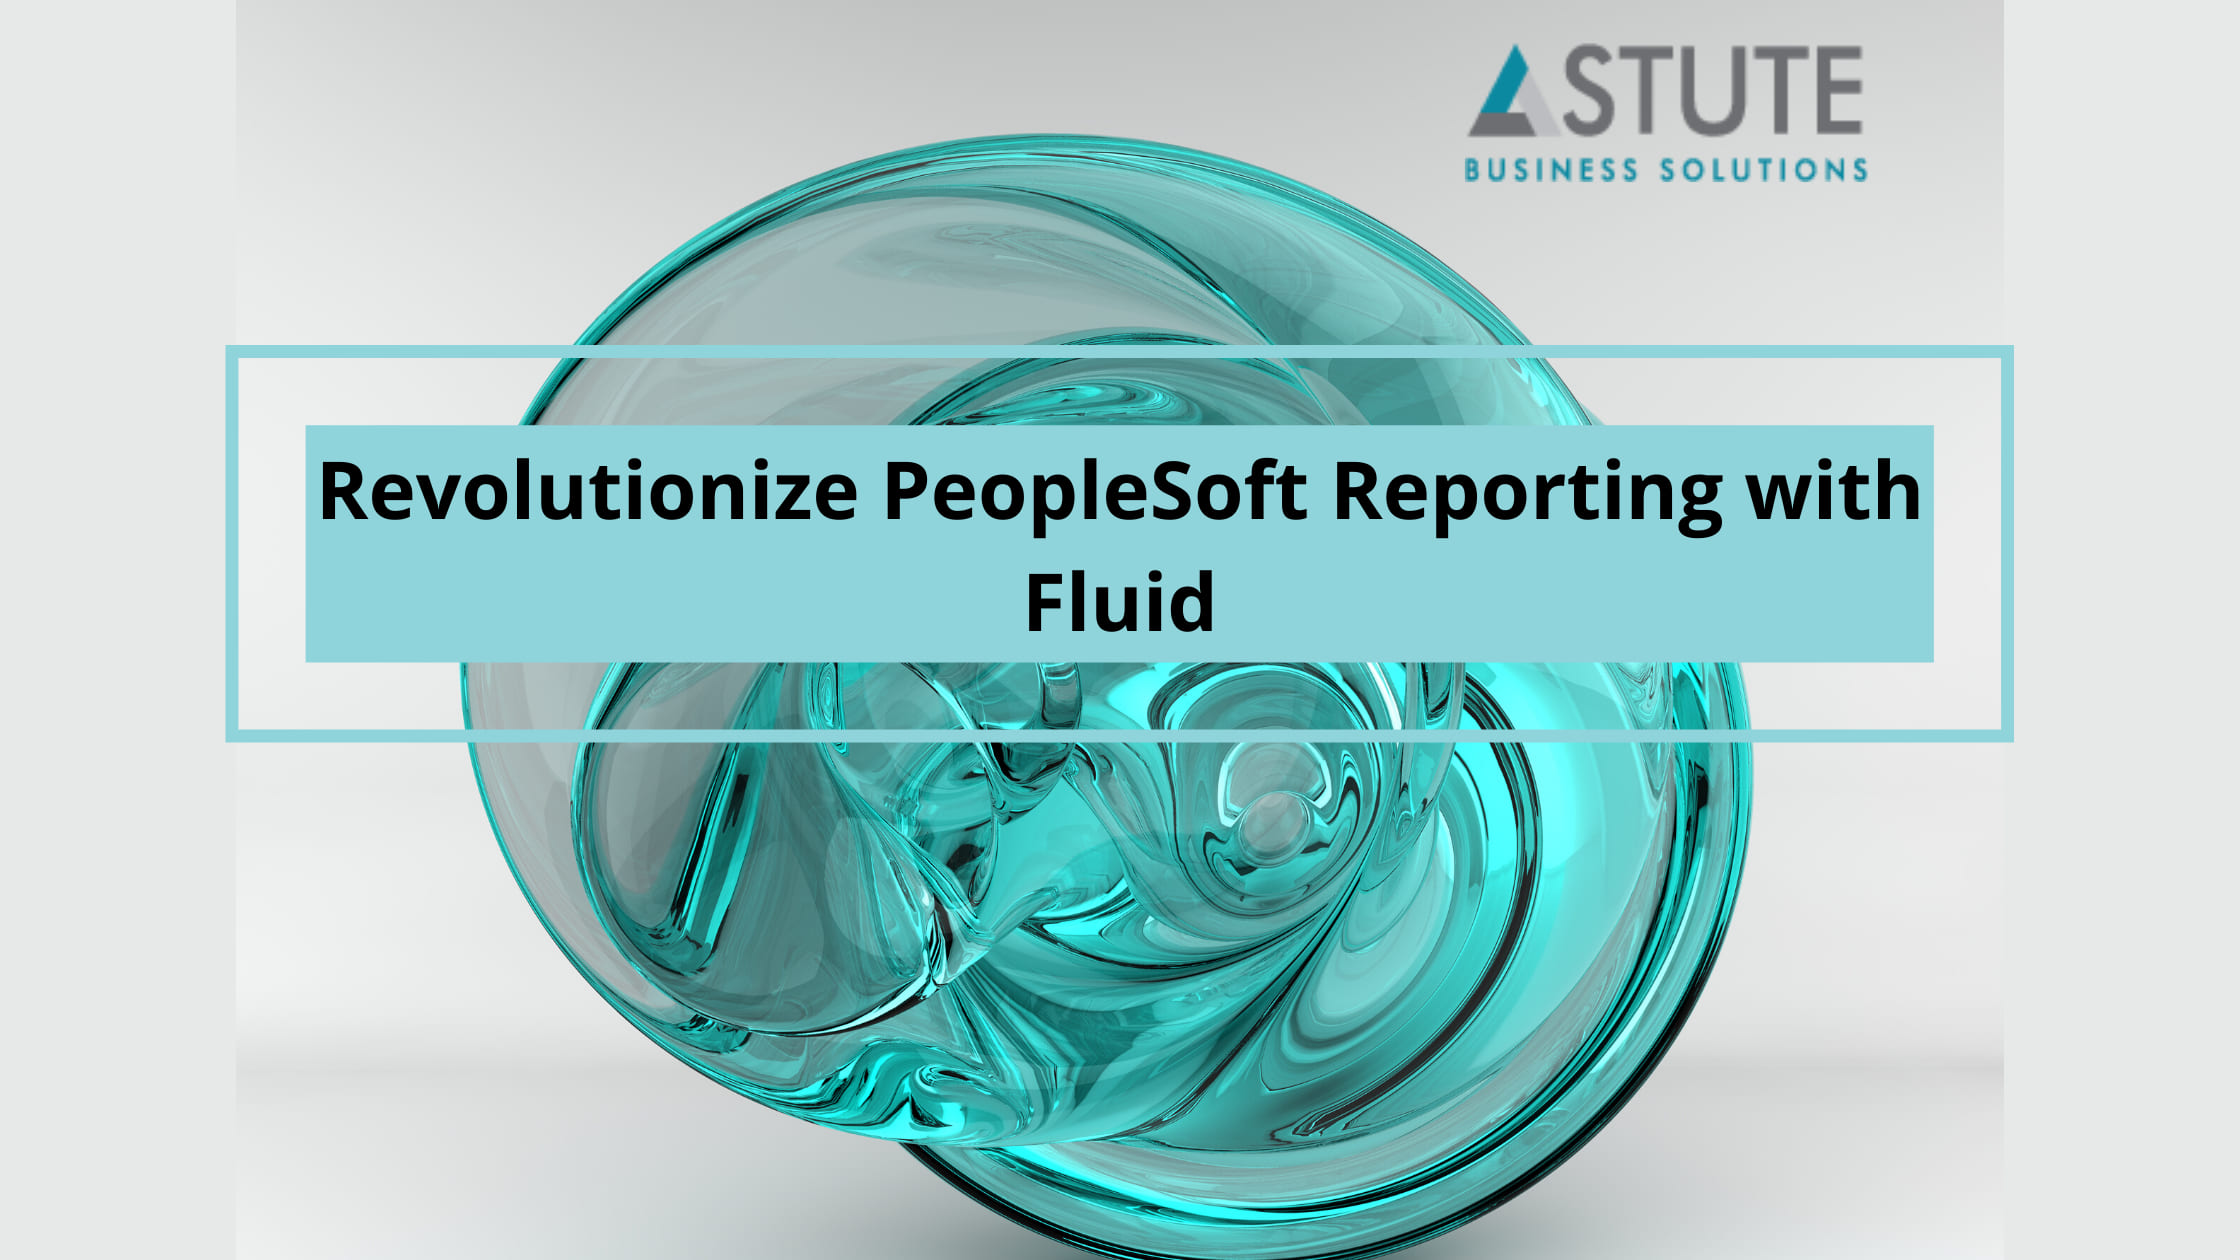 Revolutionize PeopleSoft Reporting with Fluid